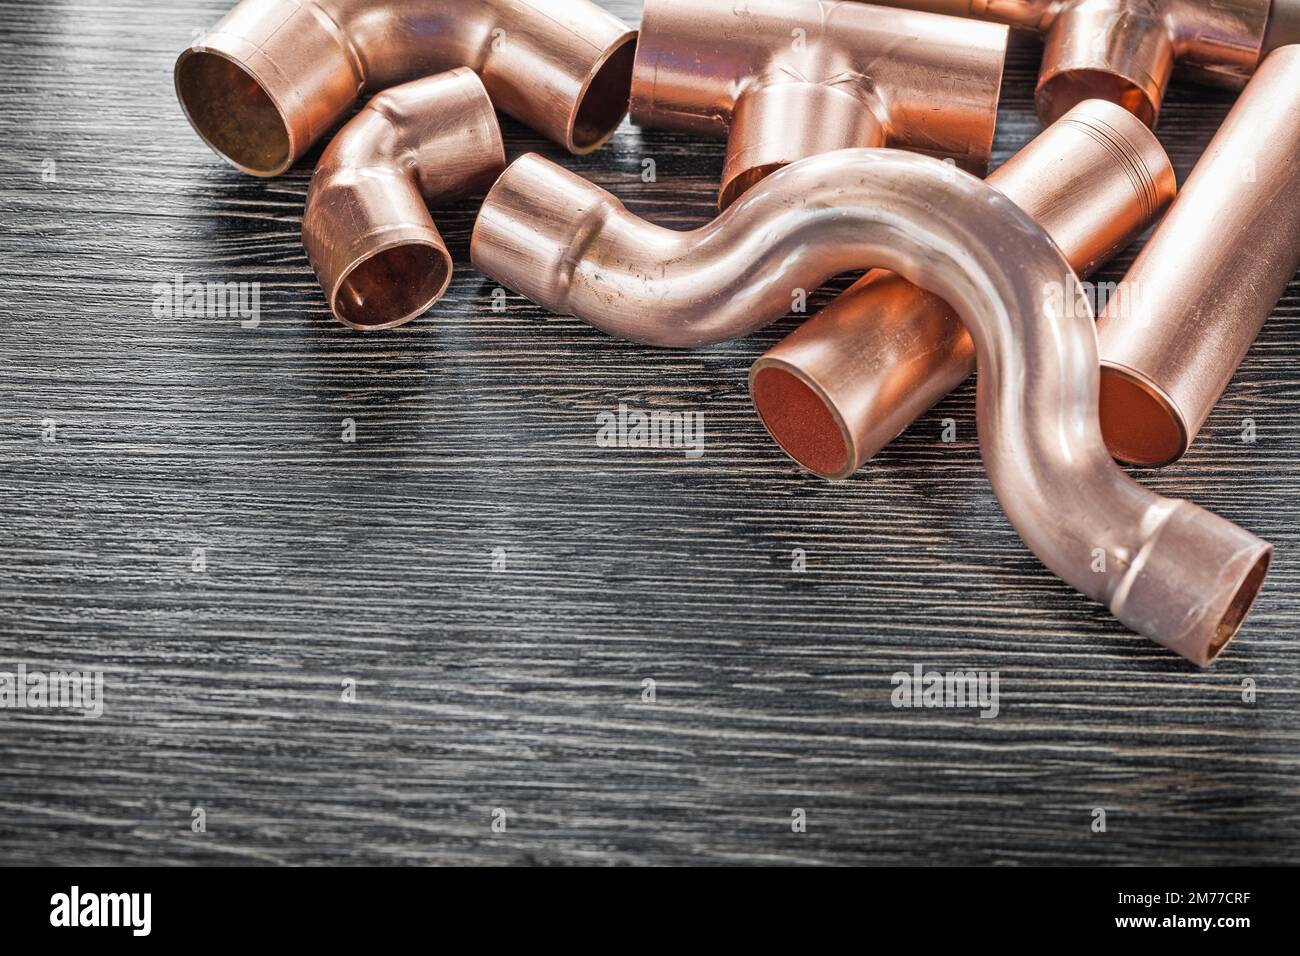 Plumbing copper water pipe fittings on wooden board. Stock Photo